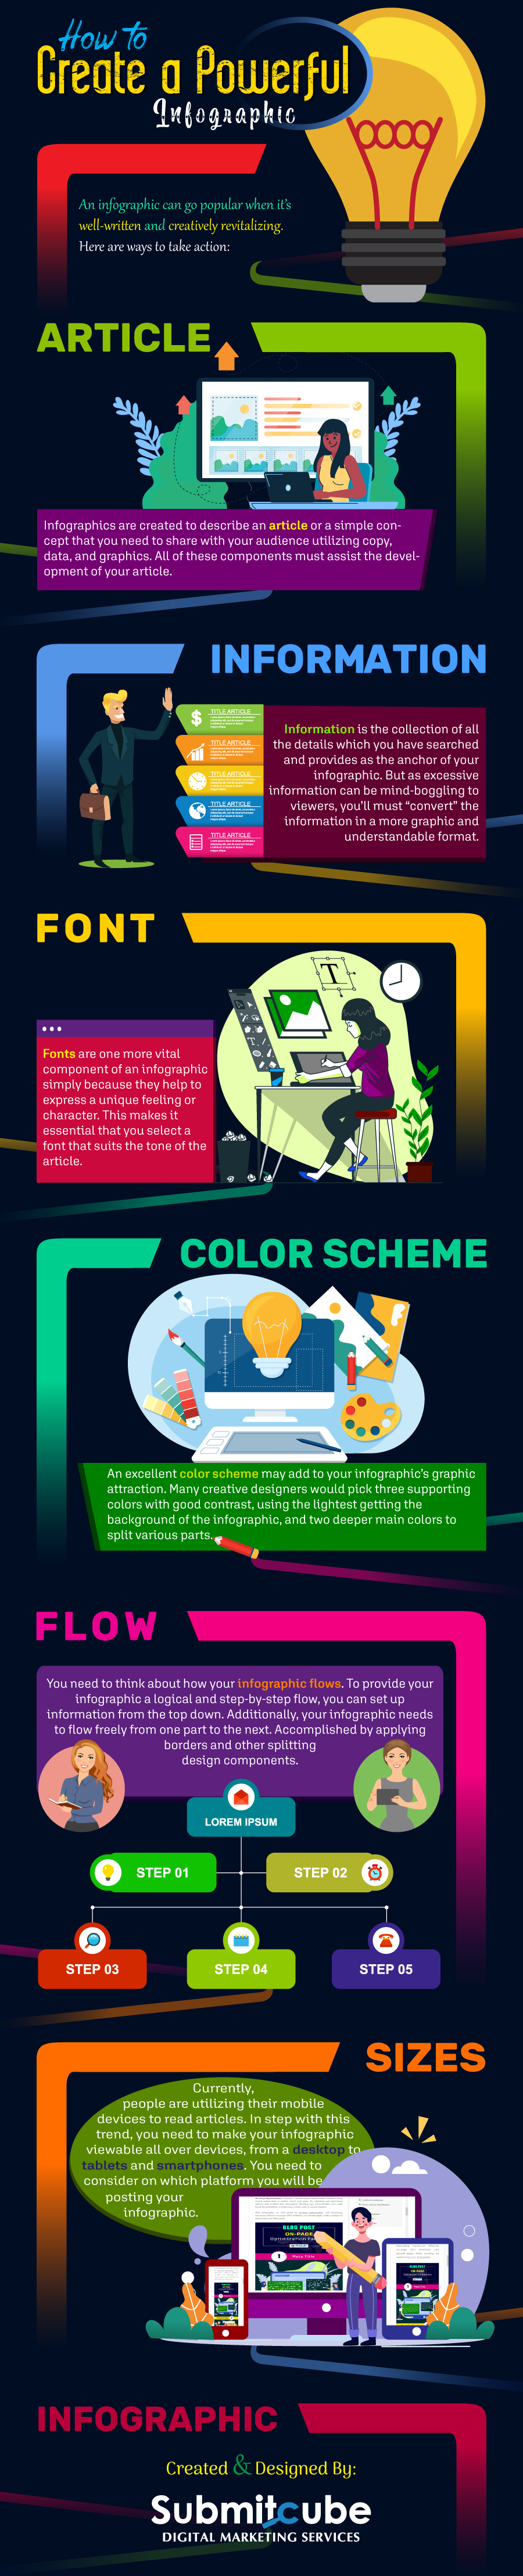 How to Create a Powerful Infographic Design